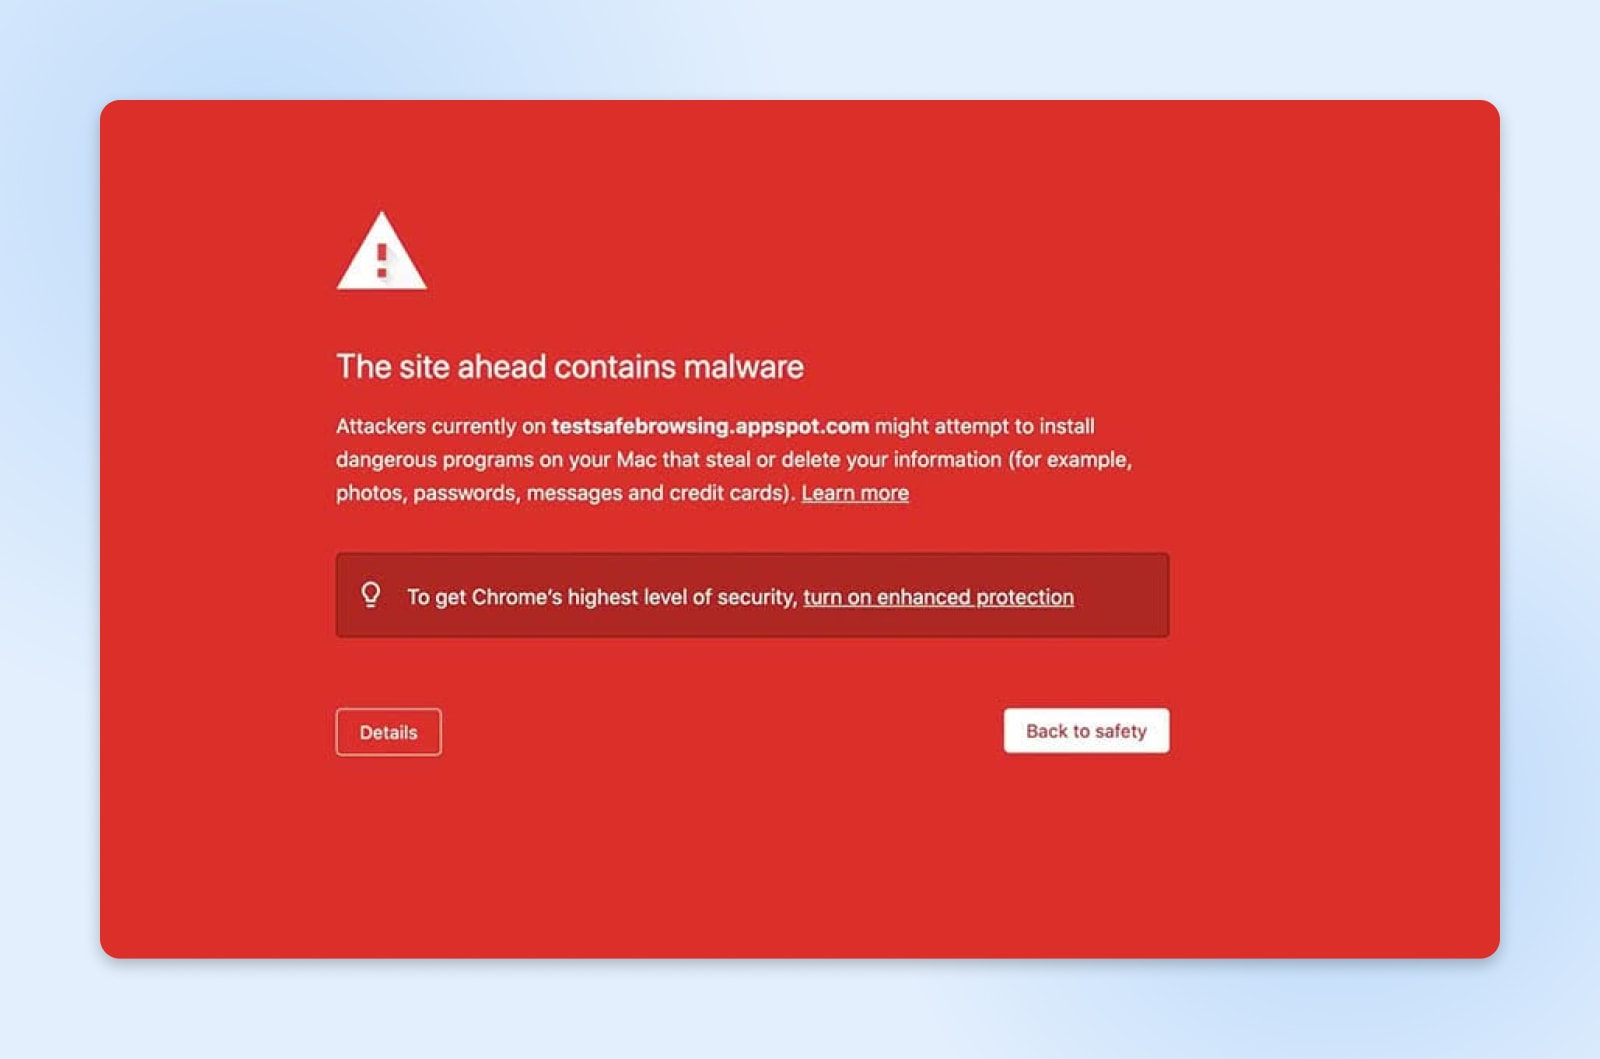 A red pop-up window shows the warning "The site ahead contains malware"